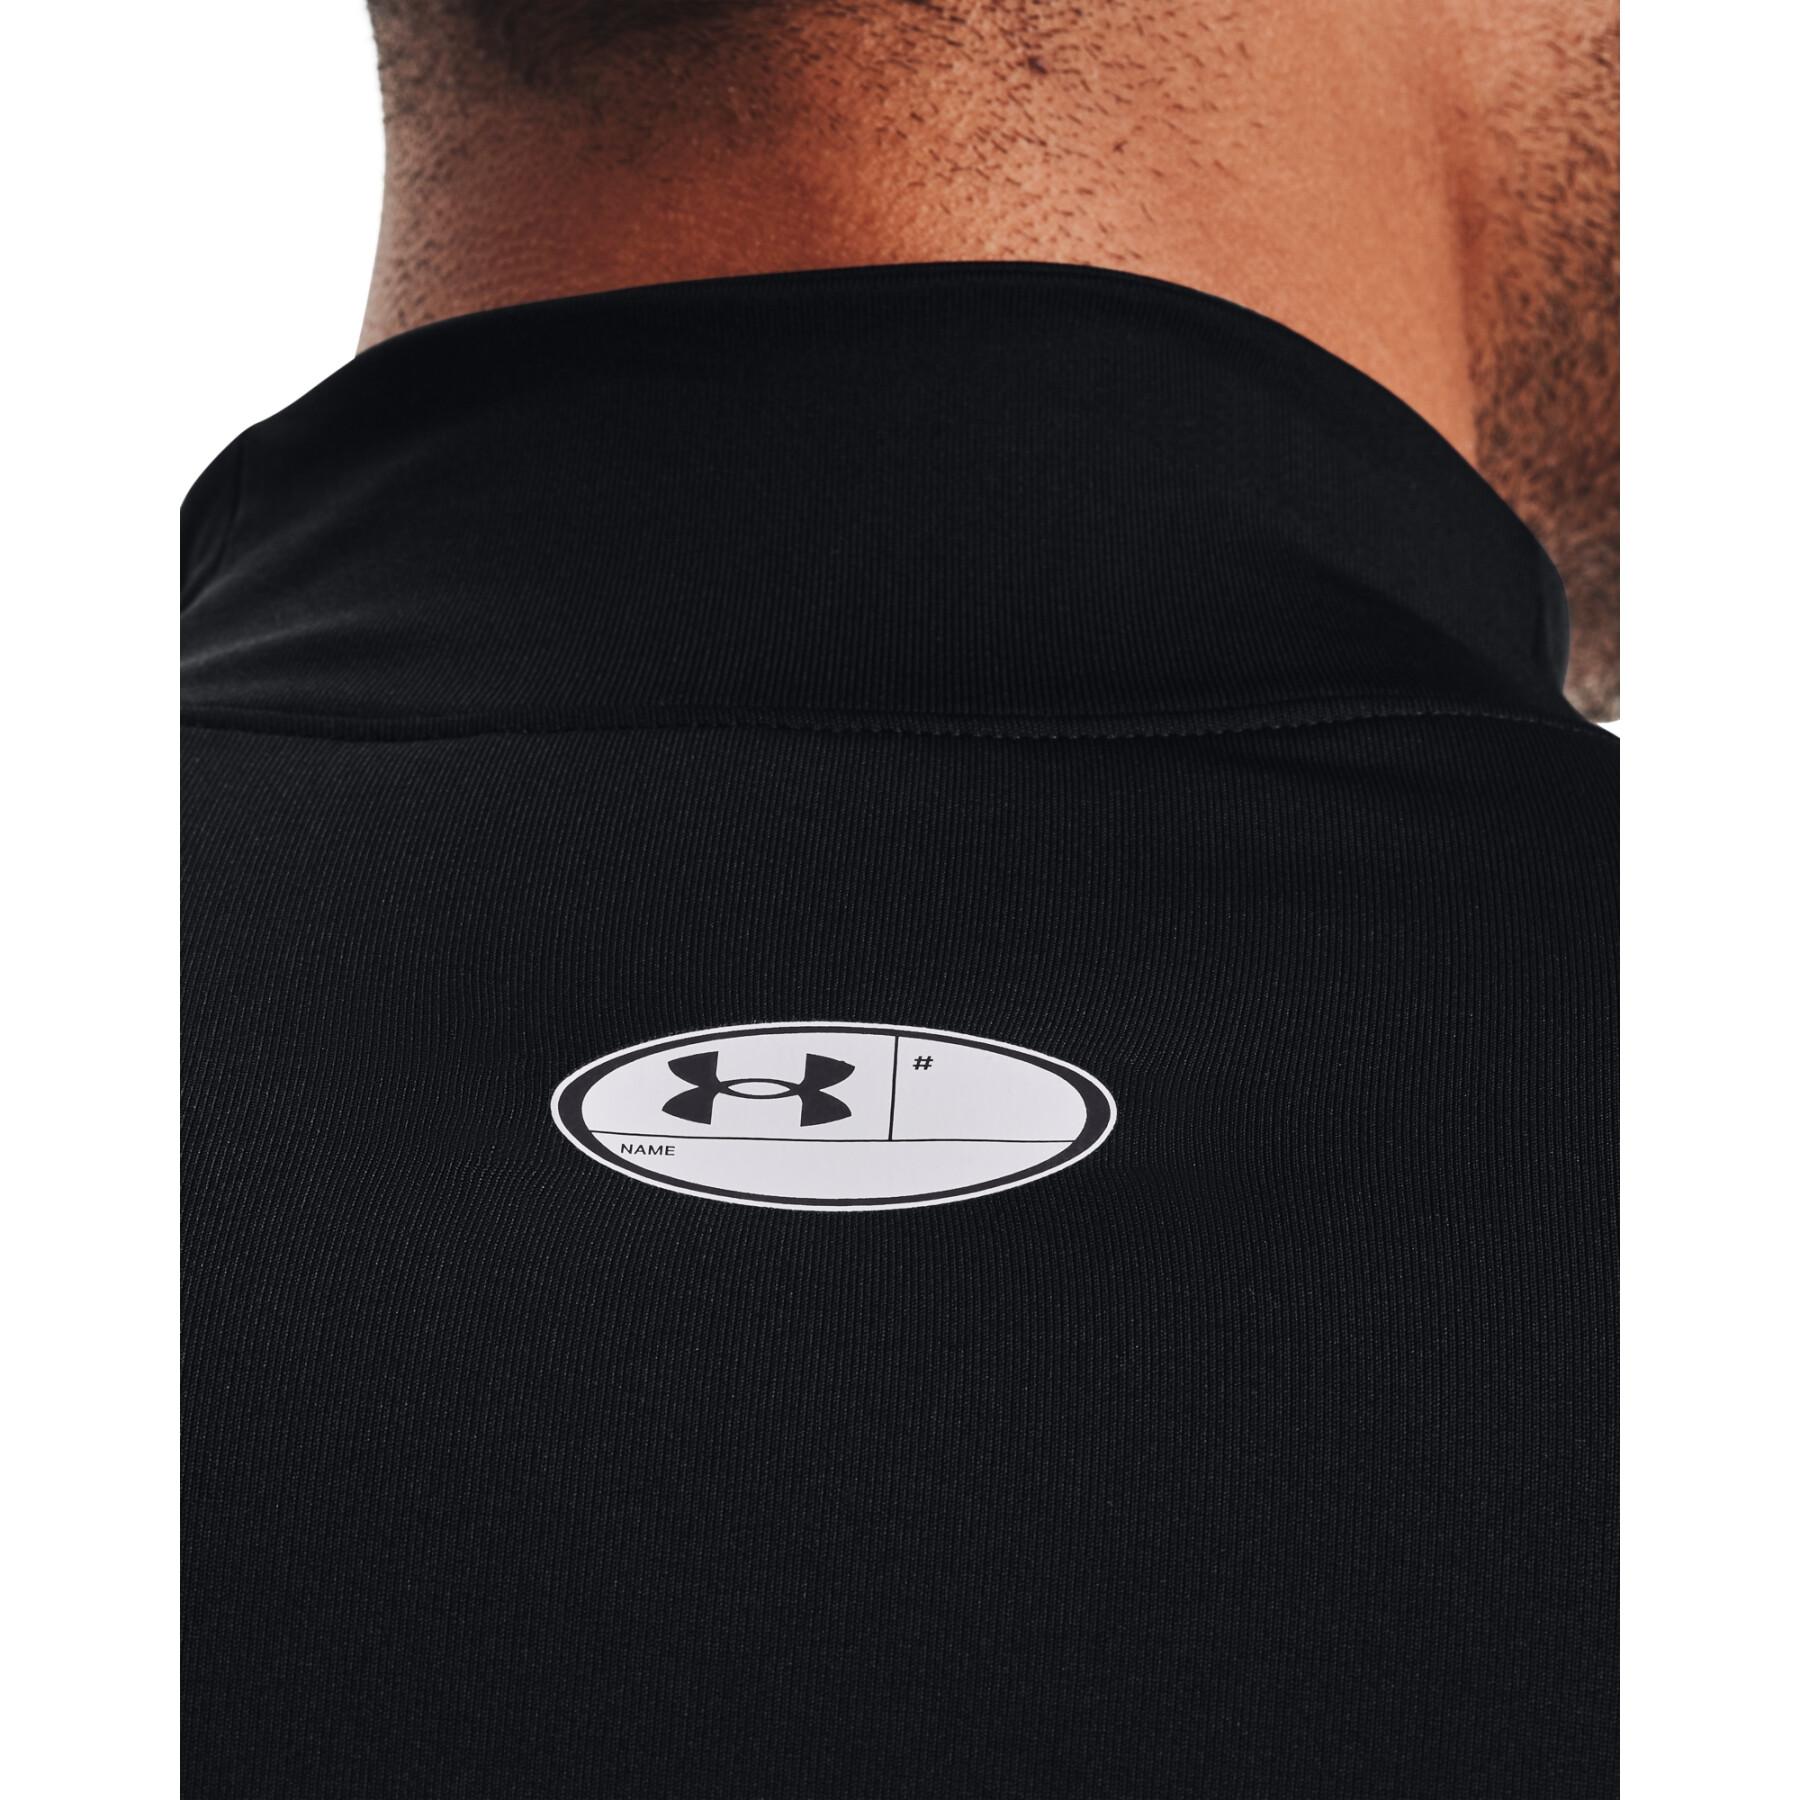 Fitted high neck undershirt Under Armour ColdGear®